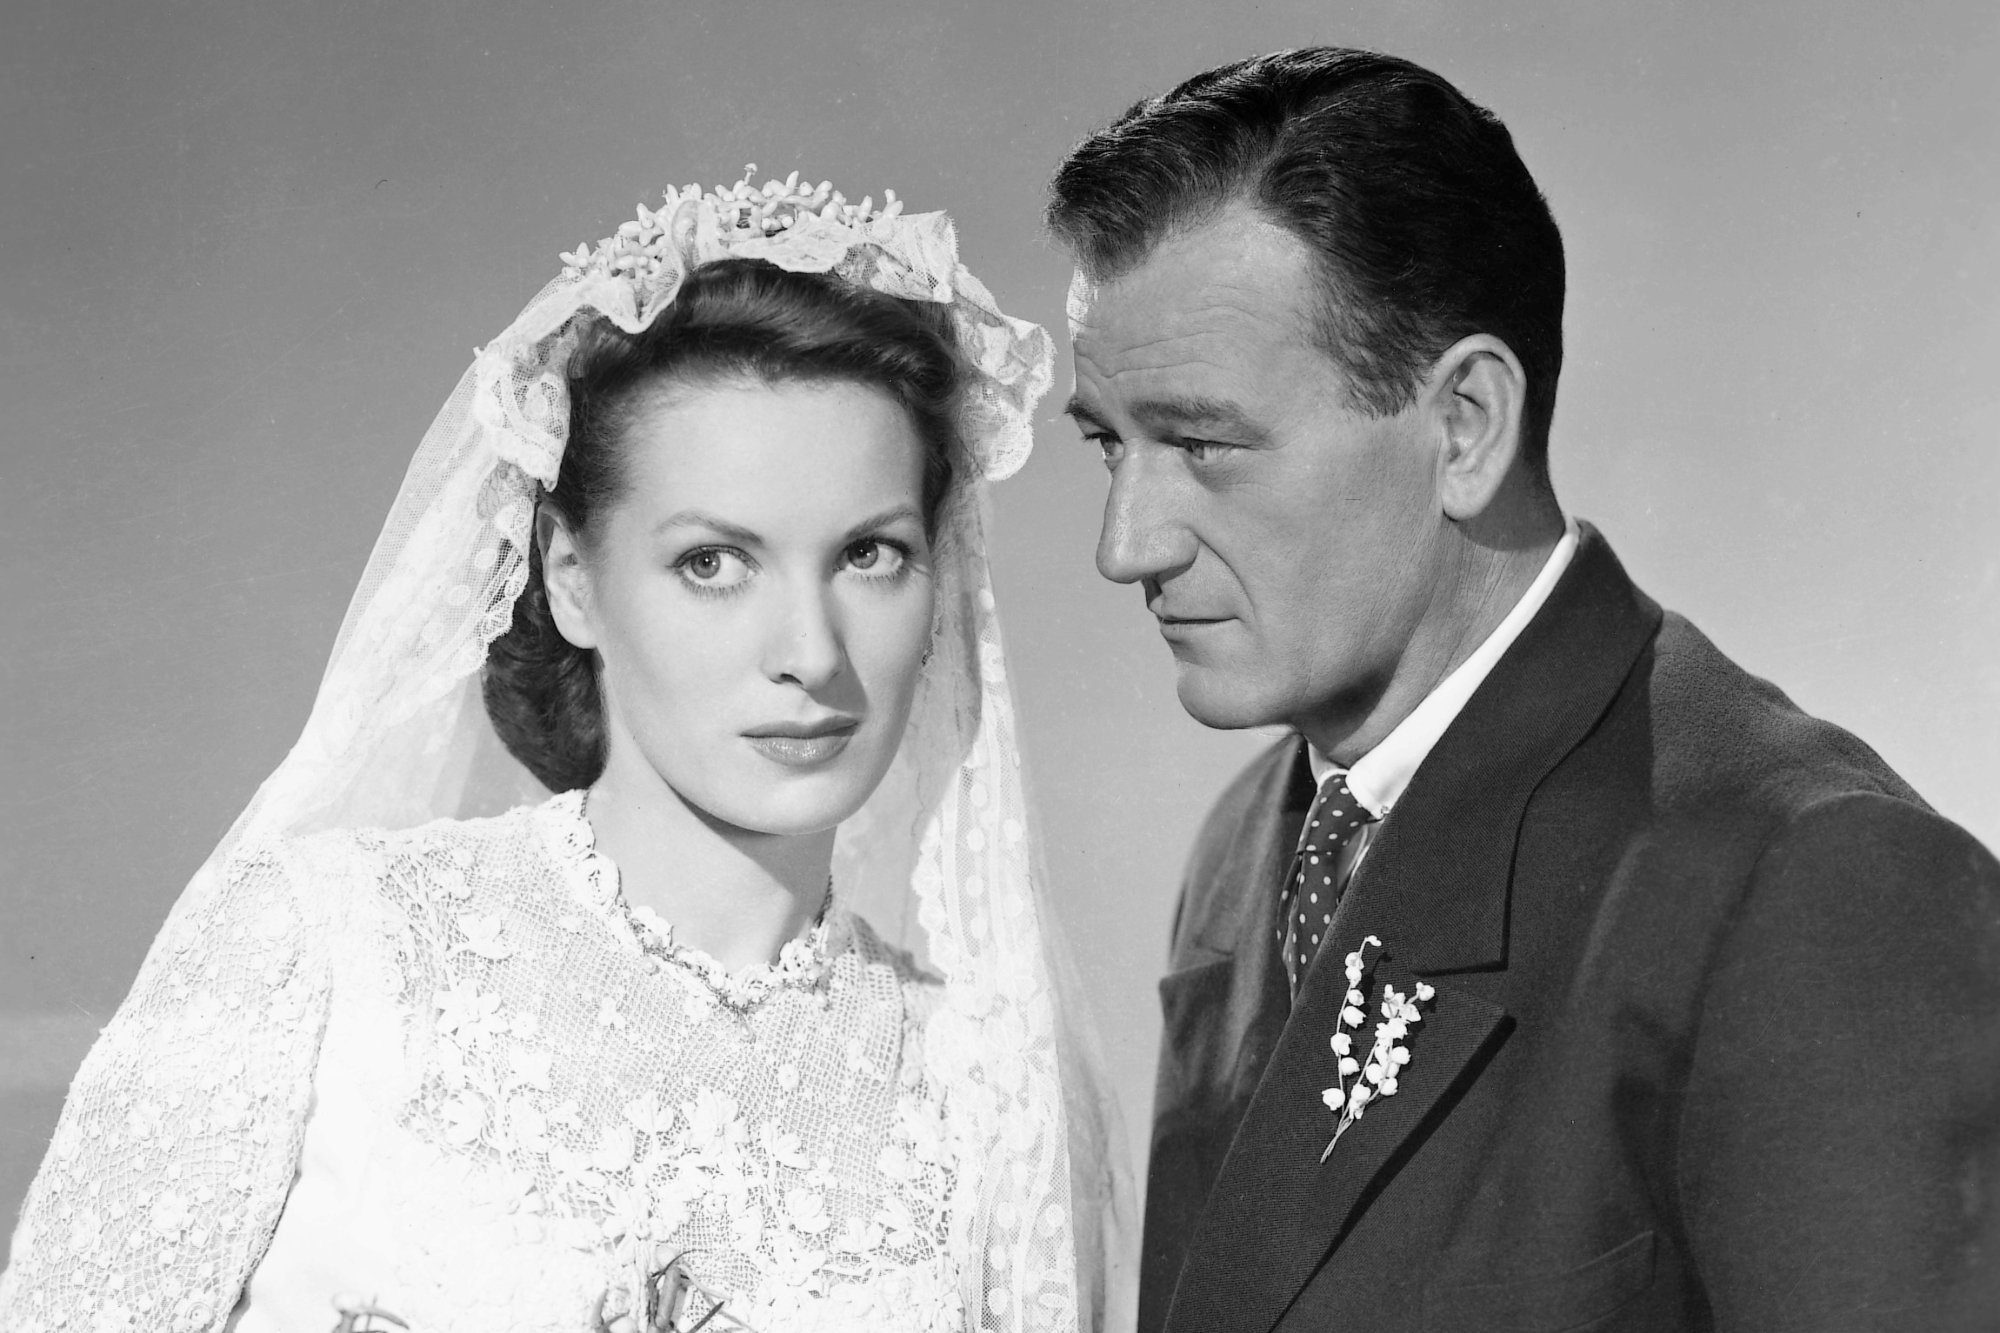 John Wayne and Maureen O’Hara Only Made ‘Rio Grande’ Under the Promise That They Could Make ‘The Quiet Man’